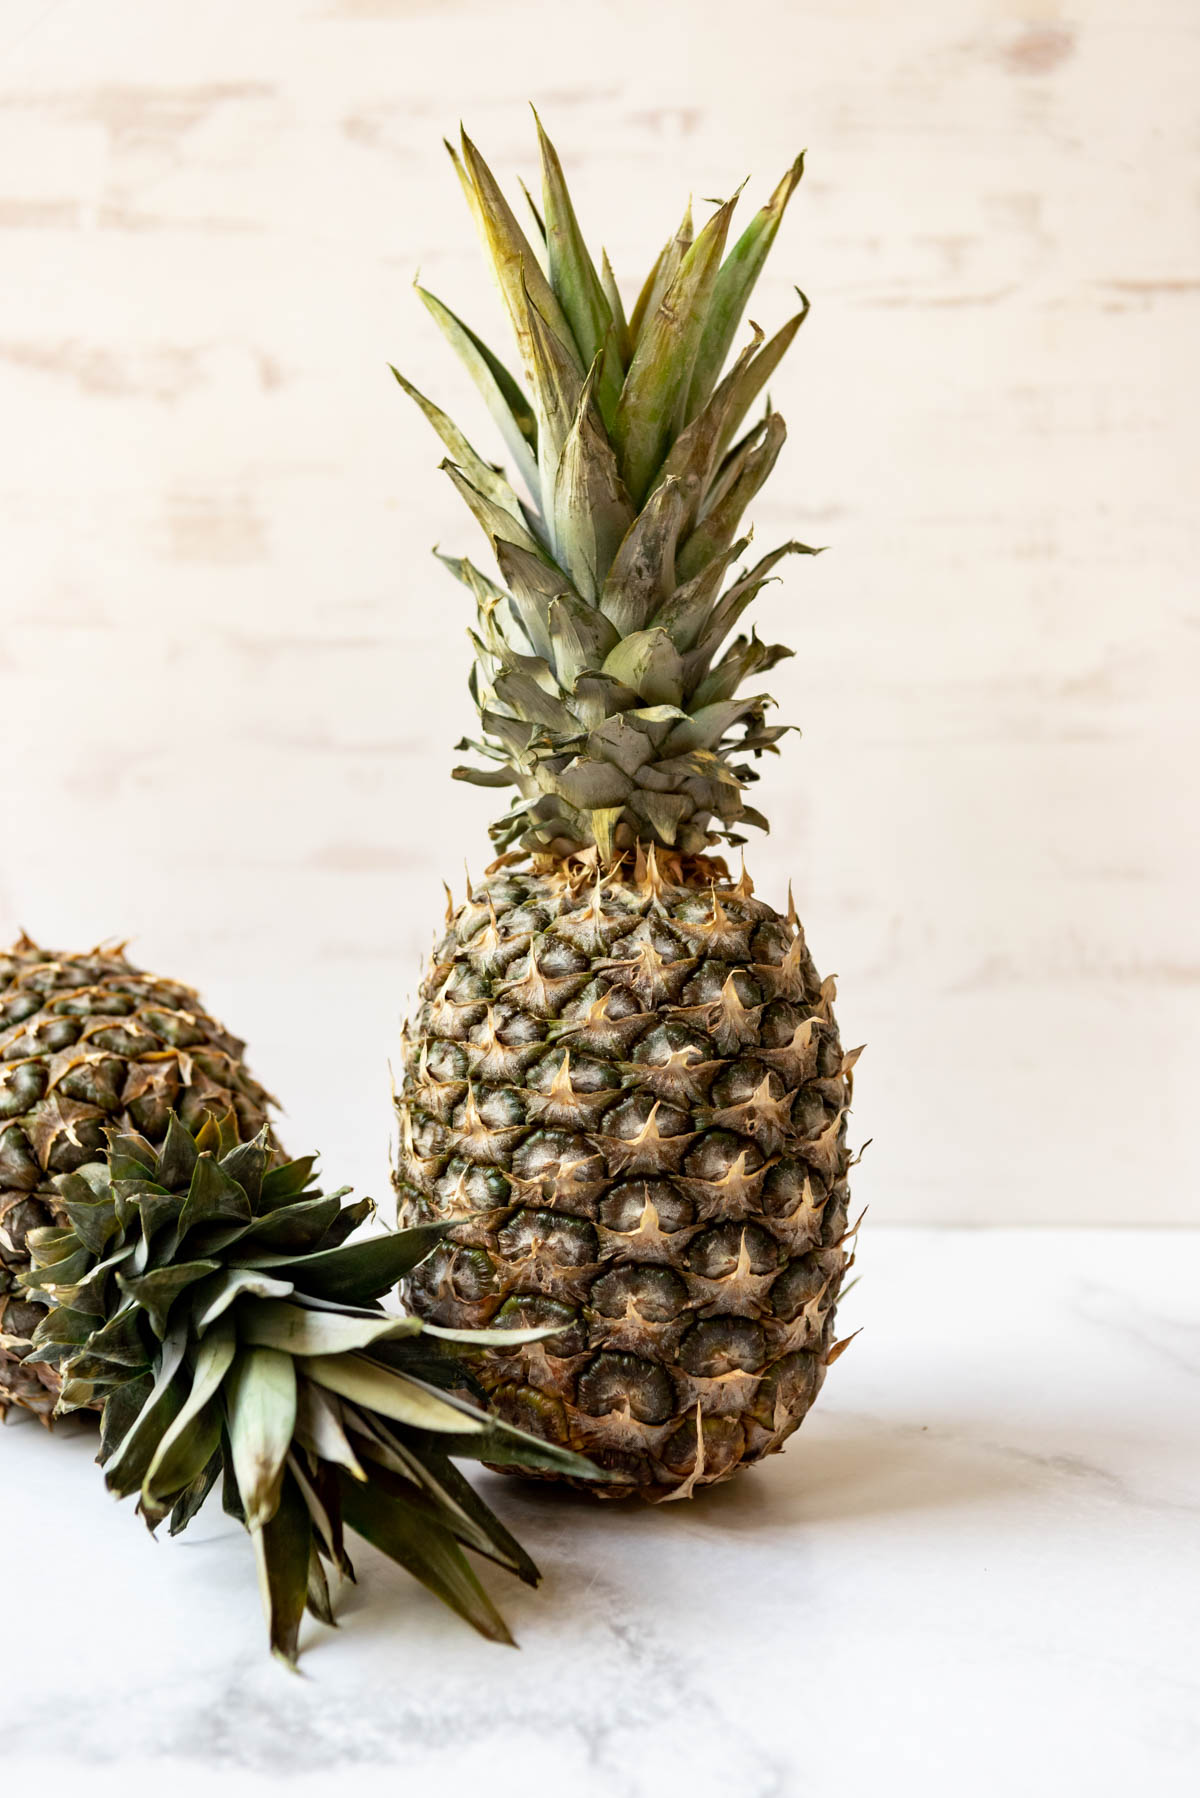 A fresh pineapple standing up on its base with another whole pineapple laying next to it.